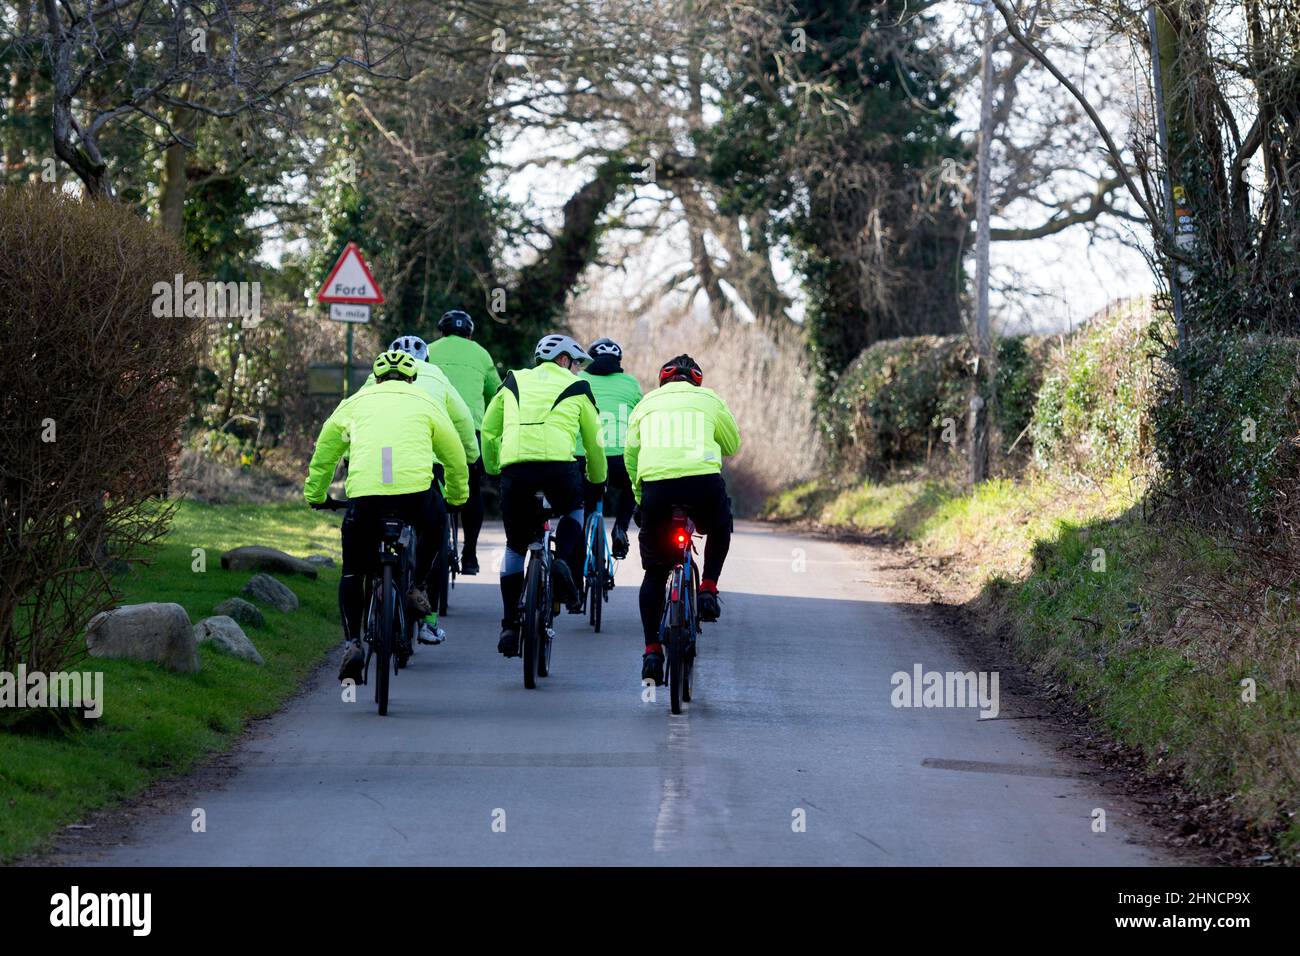 A group of cyclists in Barston village, West Midlands, England, UK Stock Photo